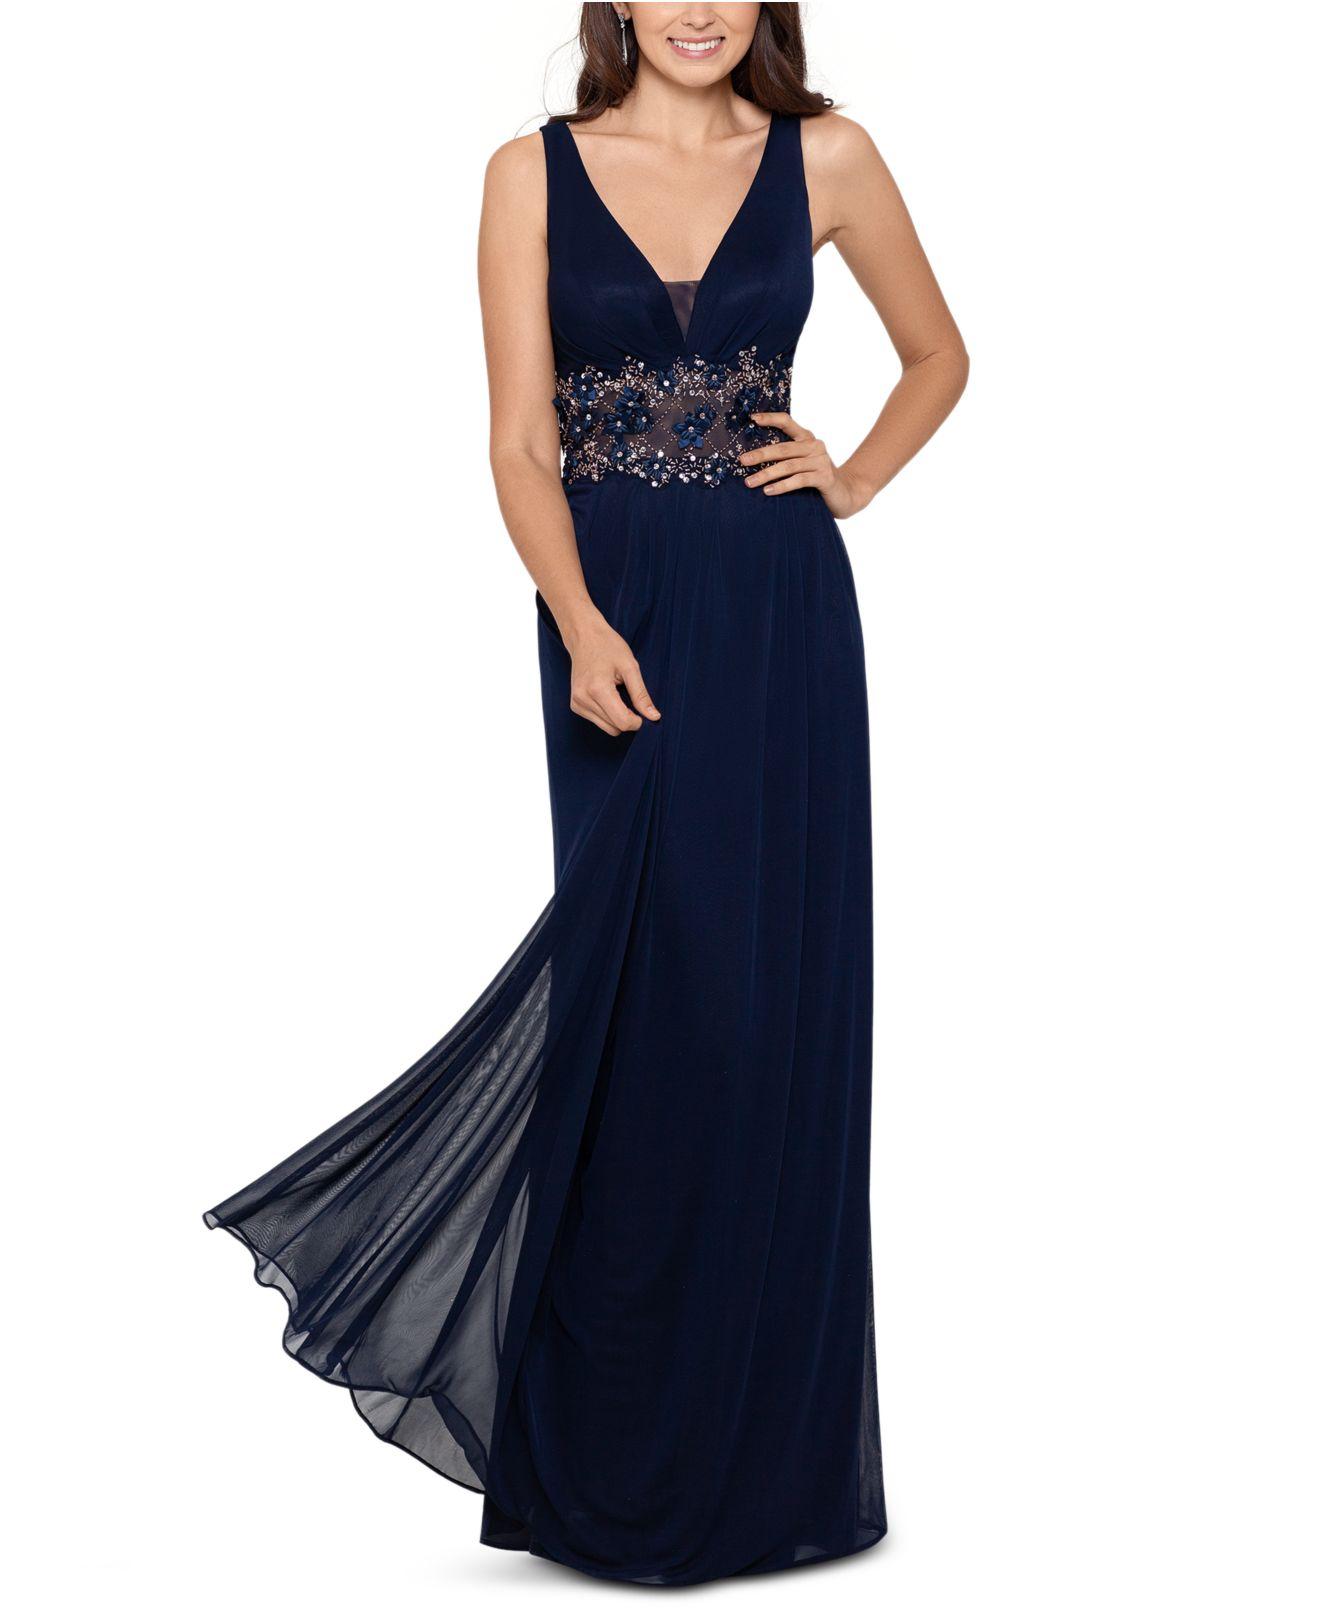 Betsy & Adam Synthetic V-neck Illusion-waist Gown in Navy (Blue) - Lyst